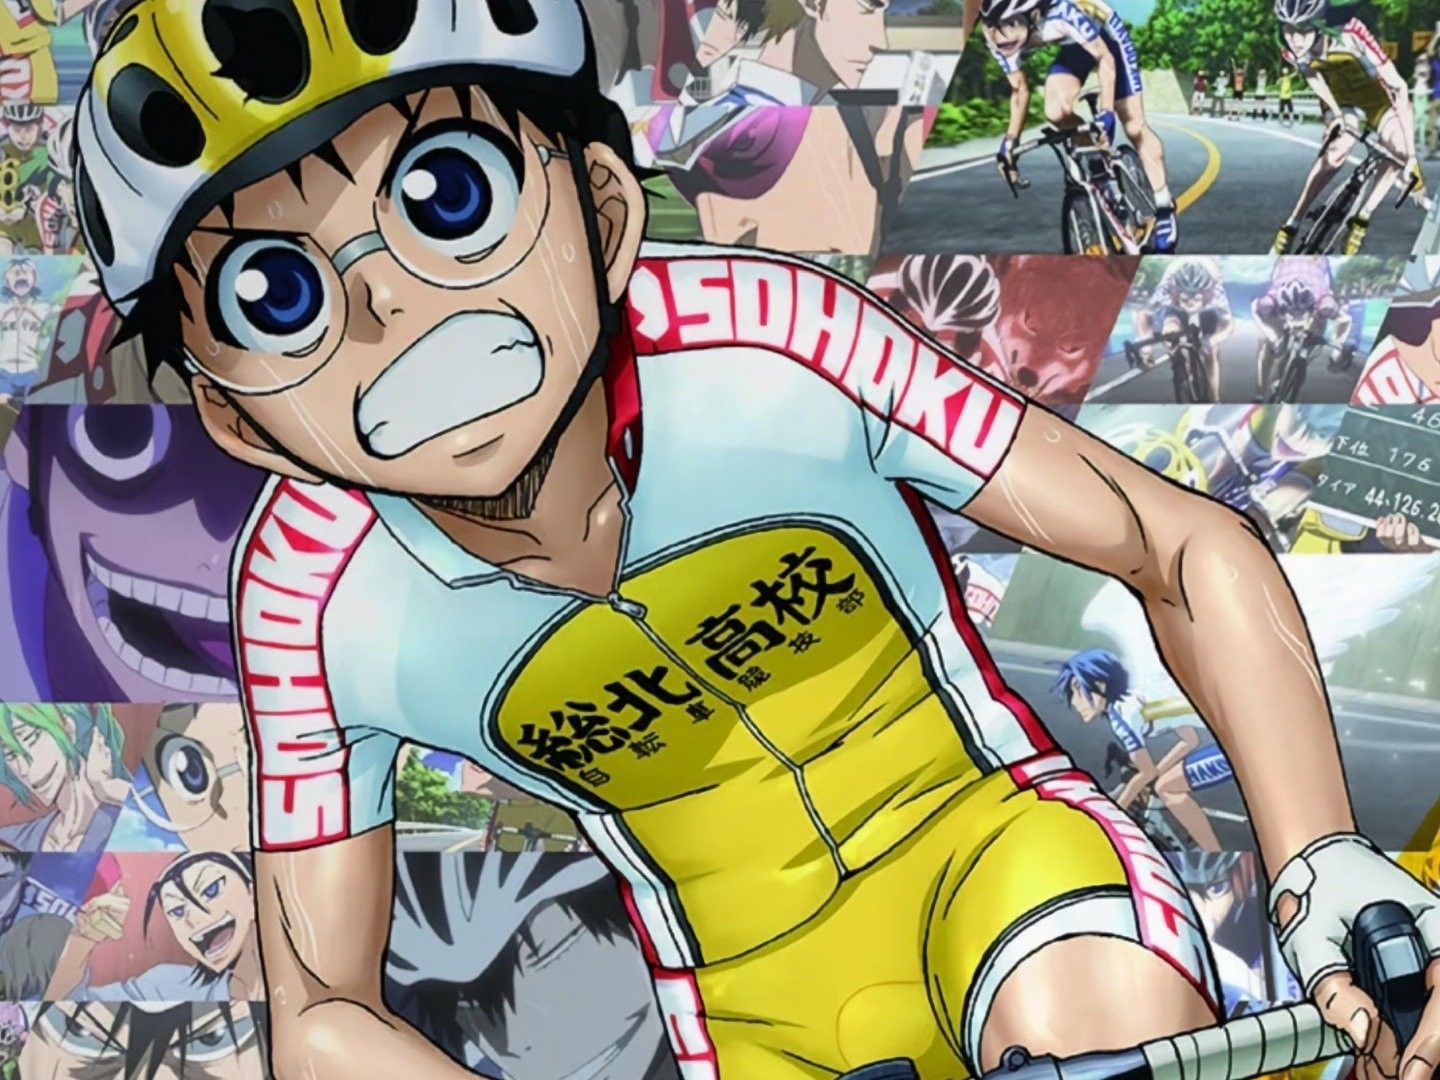 Yowamushi Pedal teaches about bike safety in new campaign – So Japan